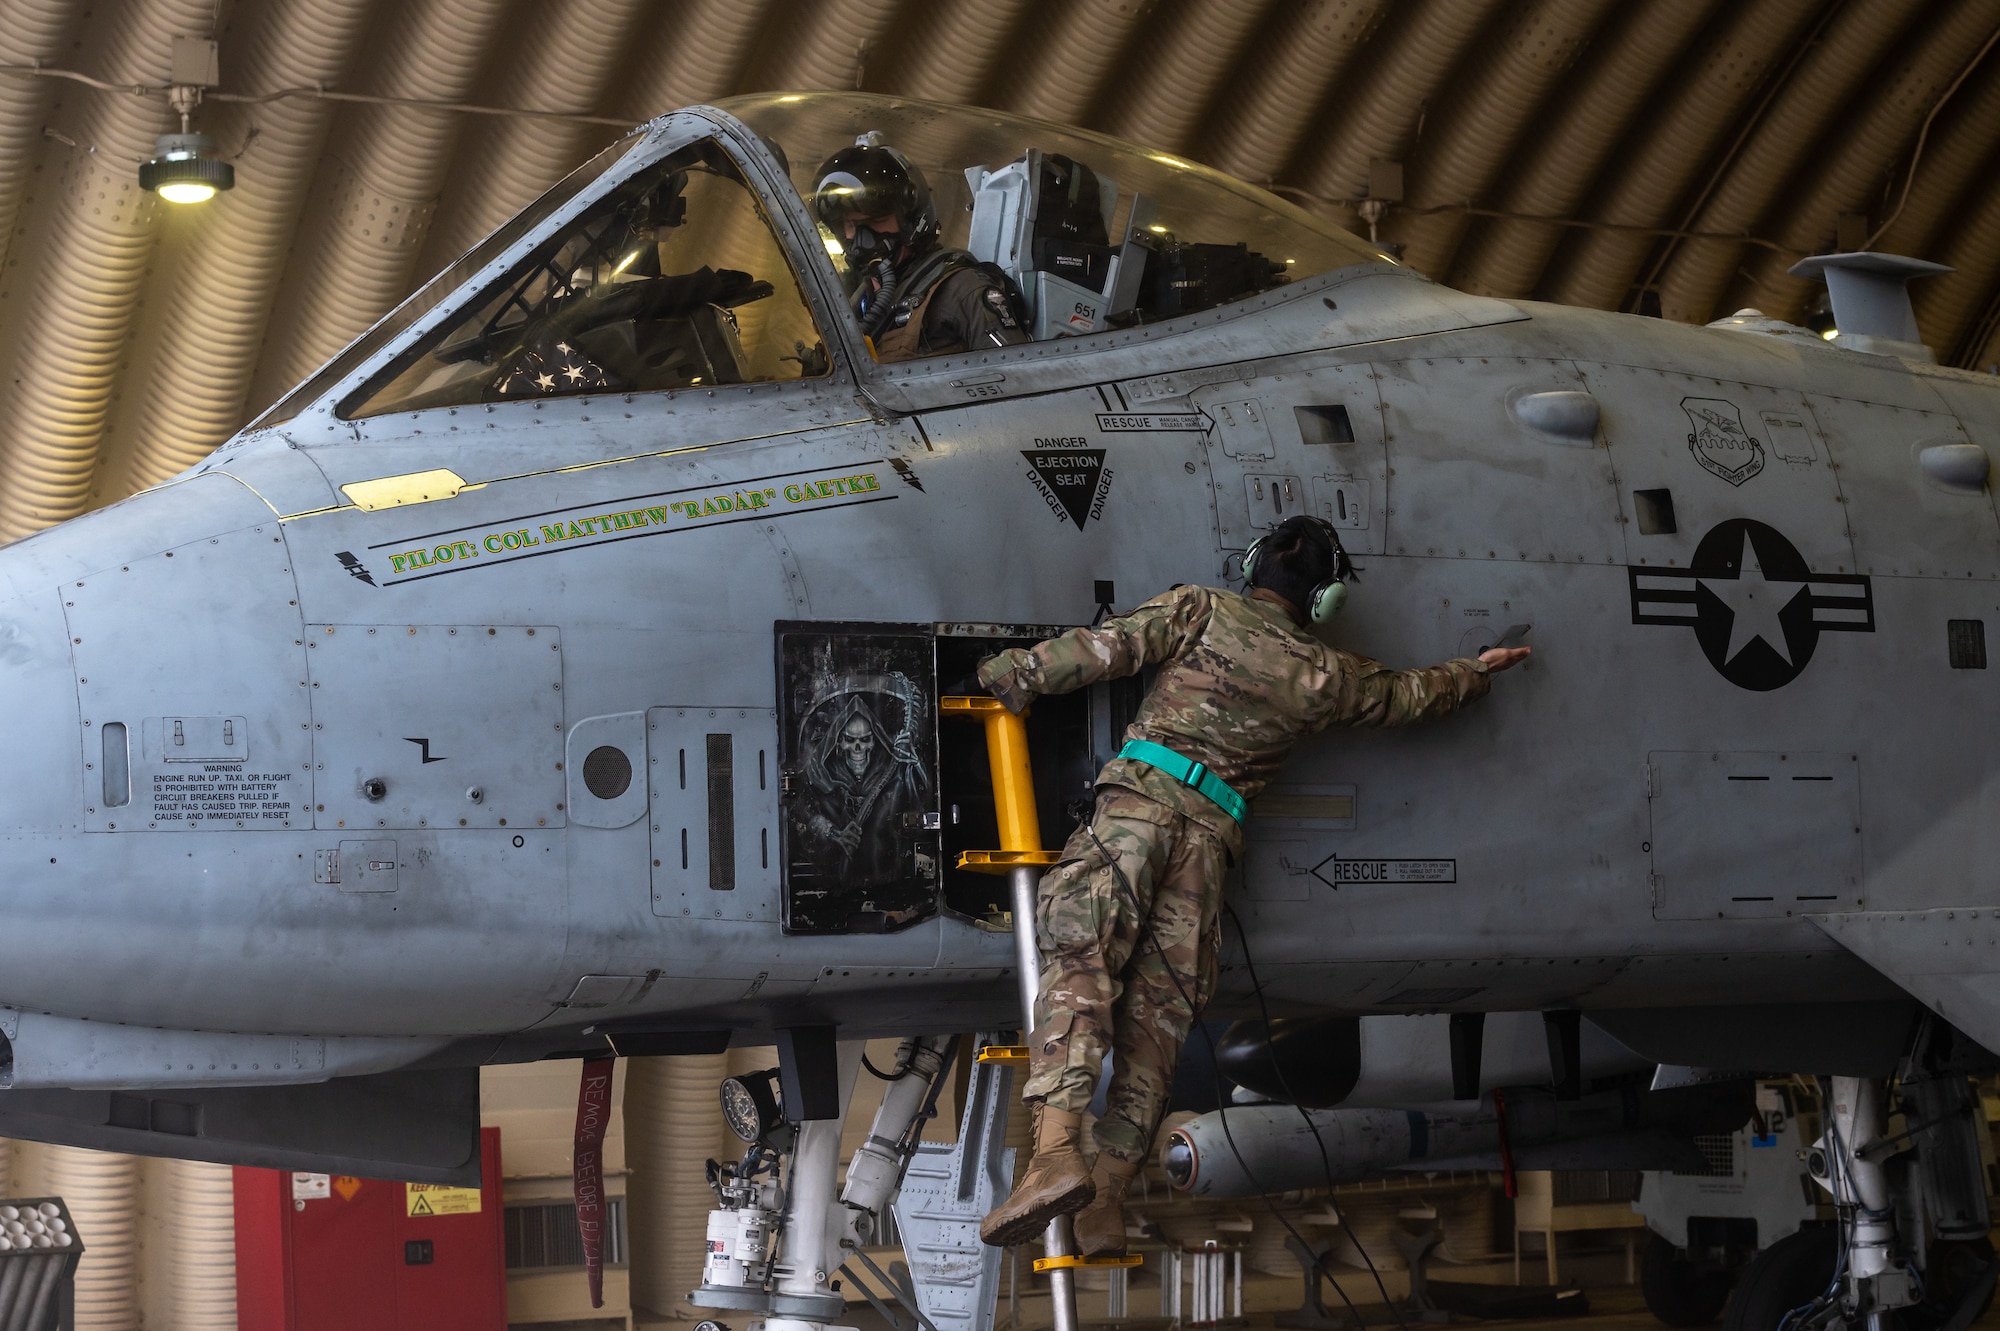 U.S. Air Force Capt. Jacob Bouck, 25th Fighter Squadron pilot, and USAF Staff Sgt. John-Michael Salenga, 25th Fighter Generation Squadron crew chief, perform preflight procedures on an A-10C Thunderbolt II before participating in an agile combat employment (ACE) training sortie